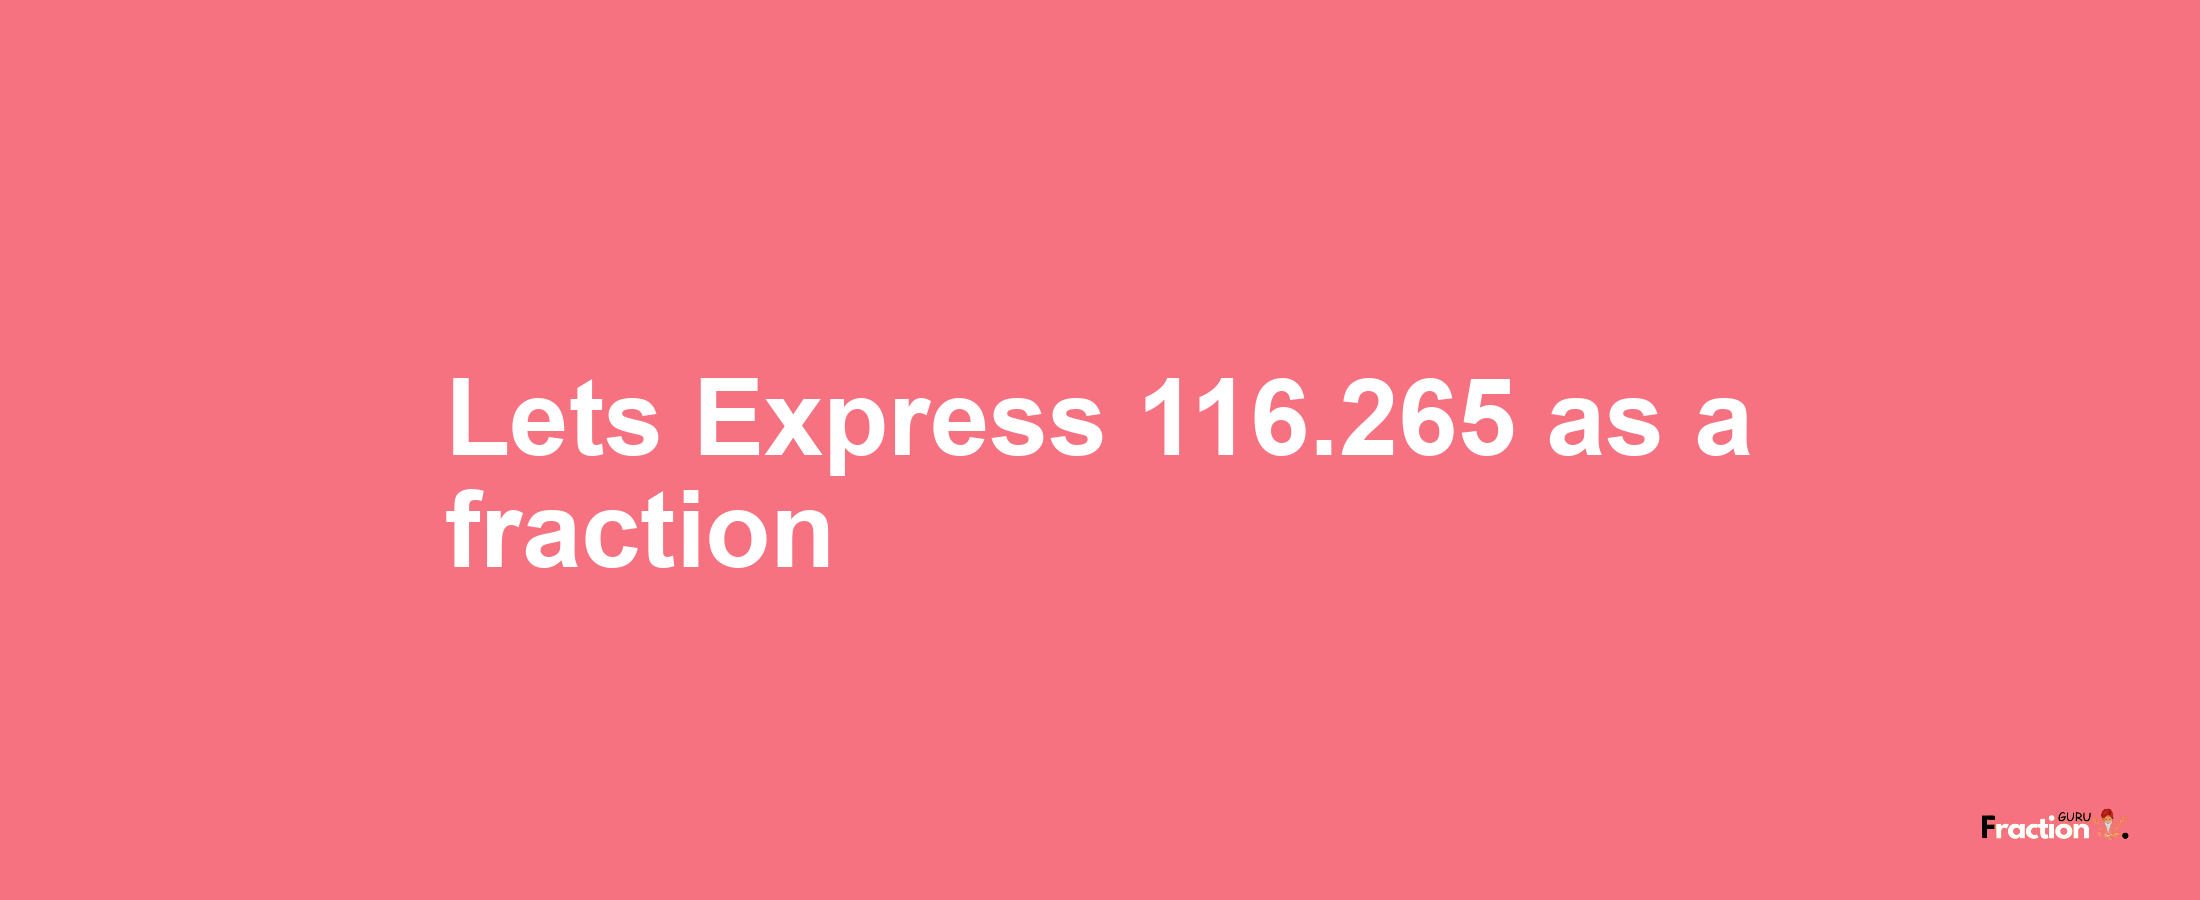 Lets Express 116.265 as afraction